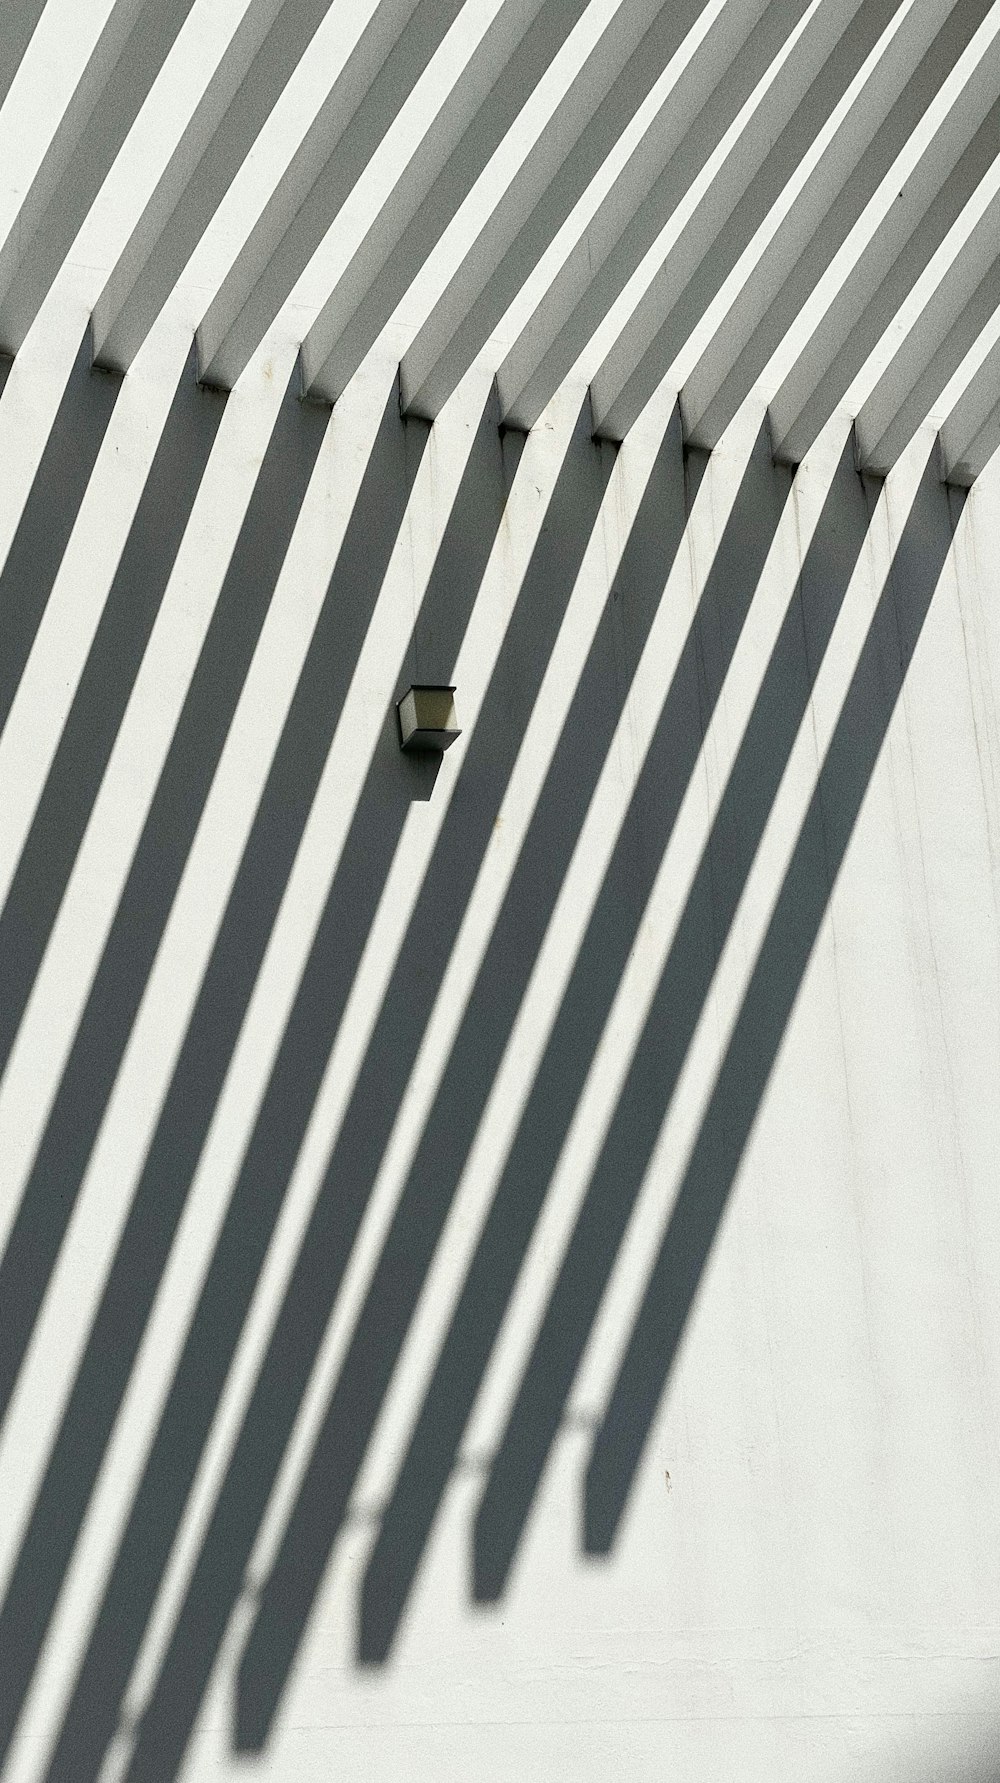 the shadow of a clock on the wall of a building